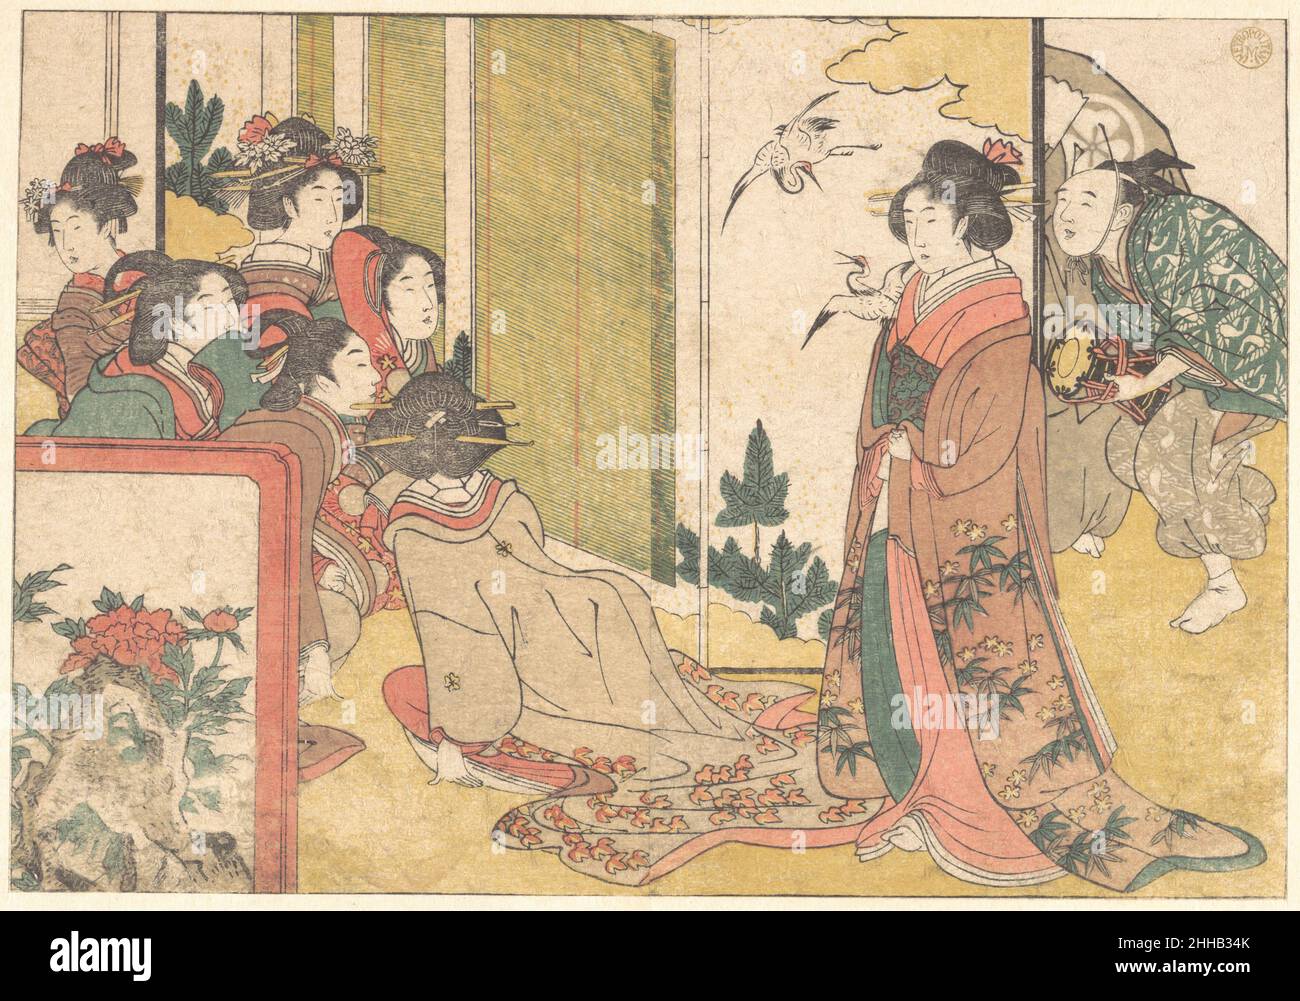 Girls Entertained by Performers, from the illustrated book Flowers of the Four Seasons 1801 Kitagawa Utamaro Japanese Theatrical performances are paradigms of people watching other people. There is a division of roles as well as a division of space. The actors move about a prescribed area, while the audience remains passively confined to another. This structure is reflected in ukiyo-e prints in which viewers are often physically separated from the objects of their gaze. They look down from balconies, peer through blinds and windows, and peek from behind screens and curtains. In this print, fro Stock Photo